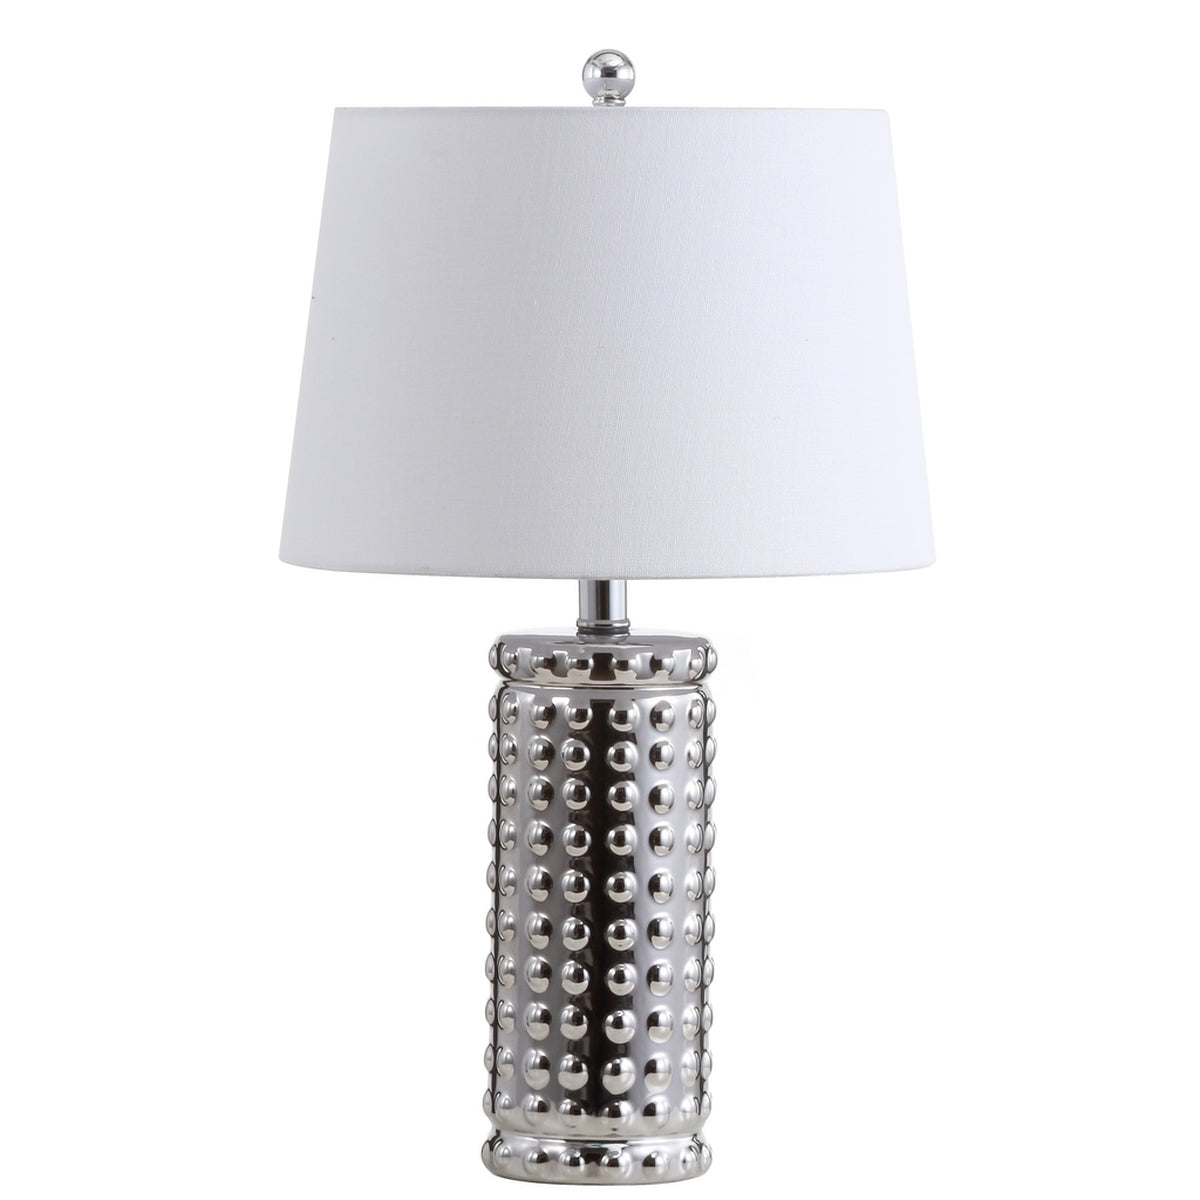 Set of Two Silver Hobnail Table Lamp by Kevin Francis Design | Luxury Home Decor